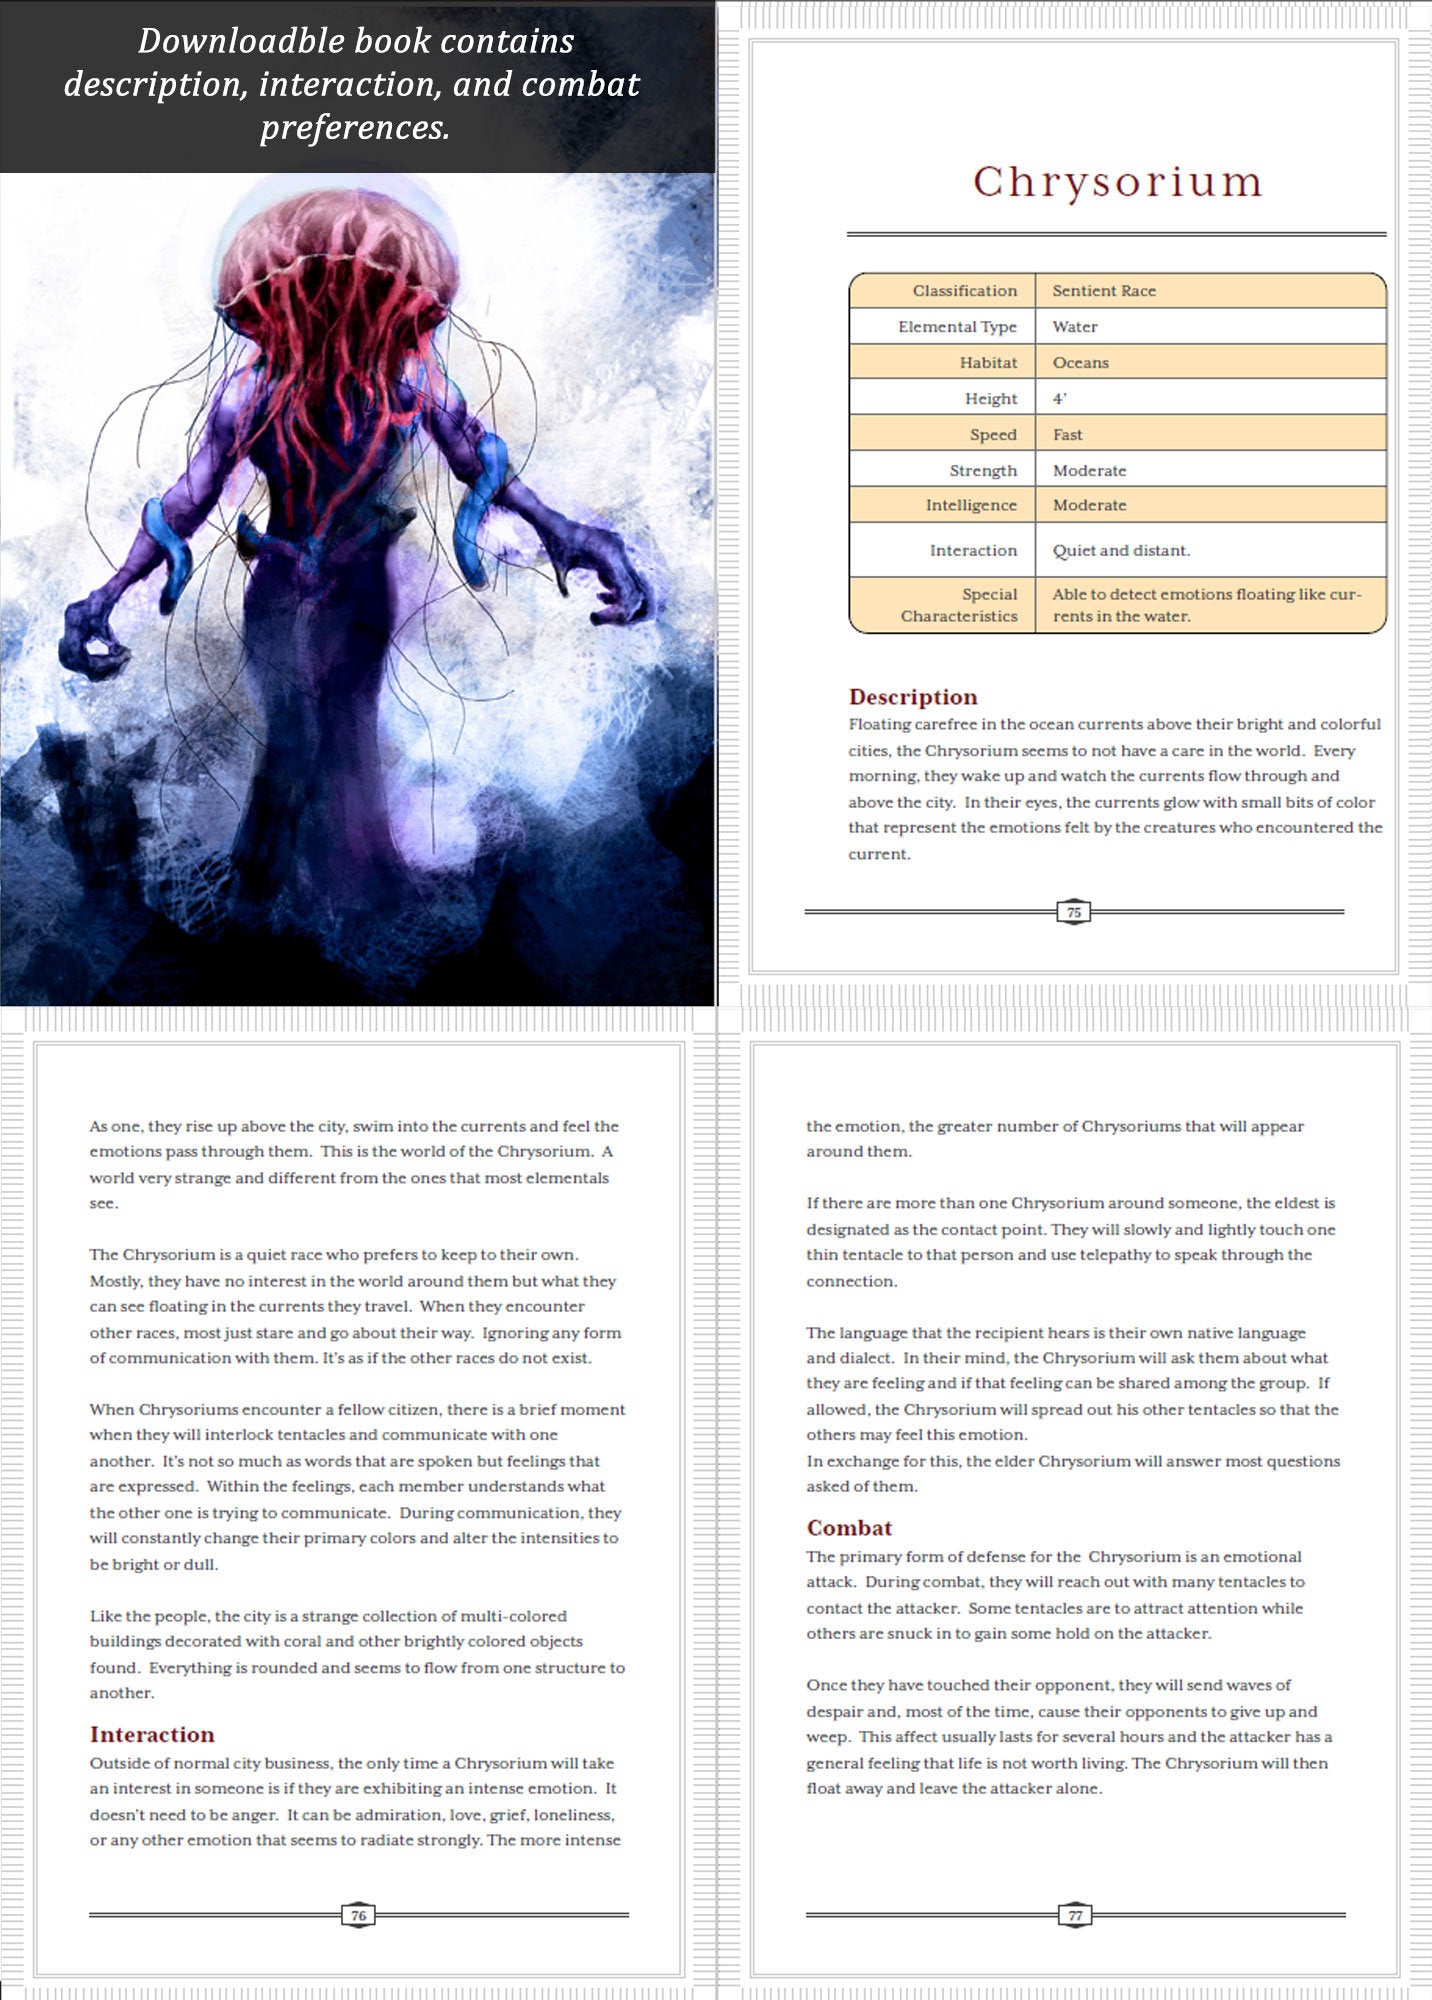 Kalan Deck of 35 Monster Cards with Downloadable PDF used in DnD and Writing